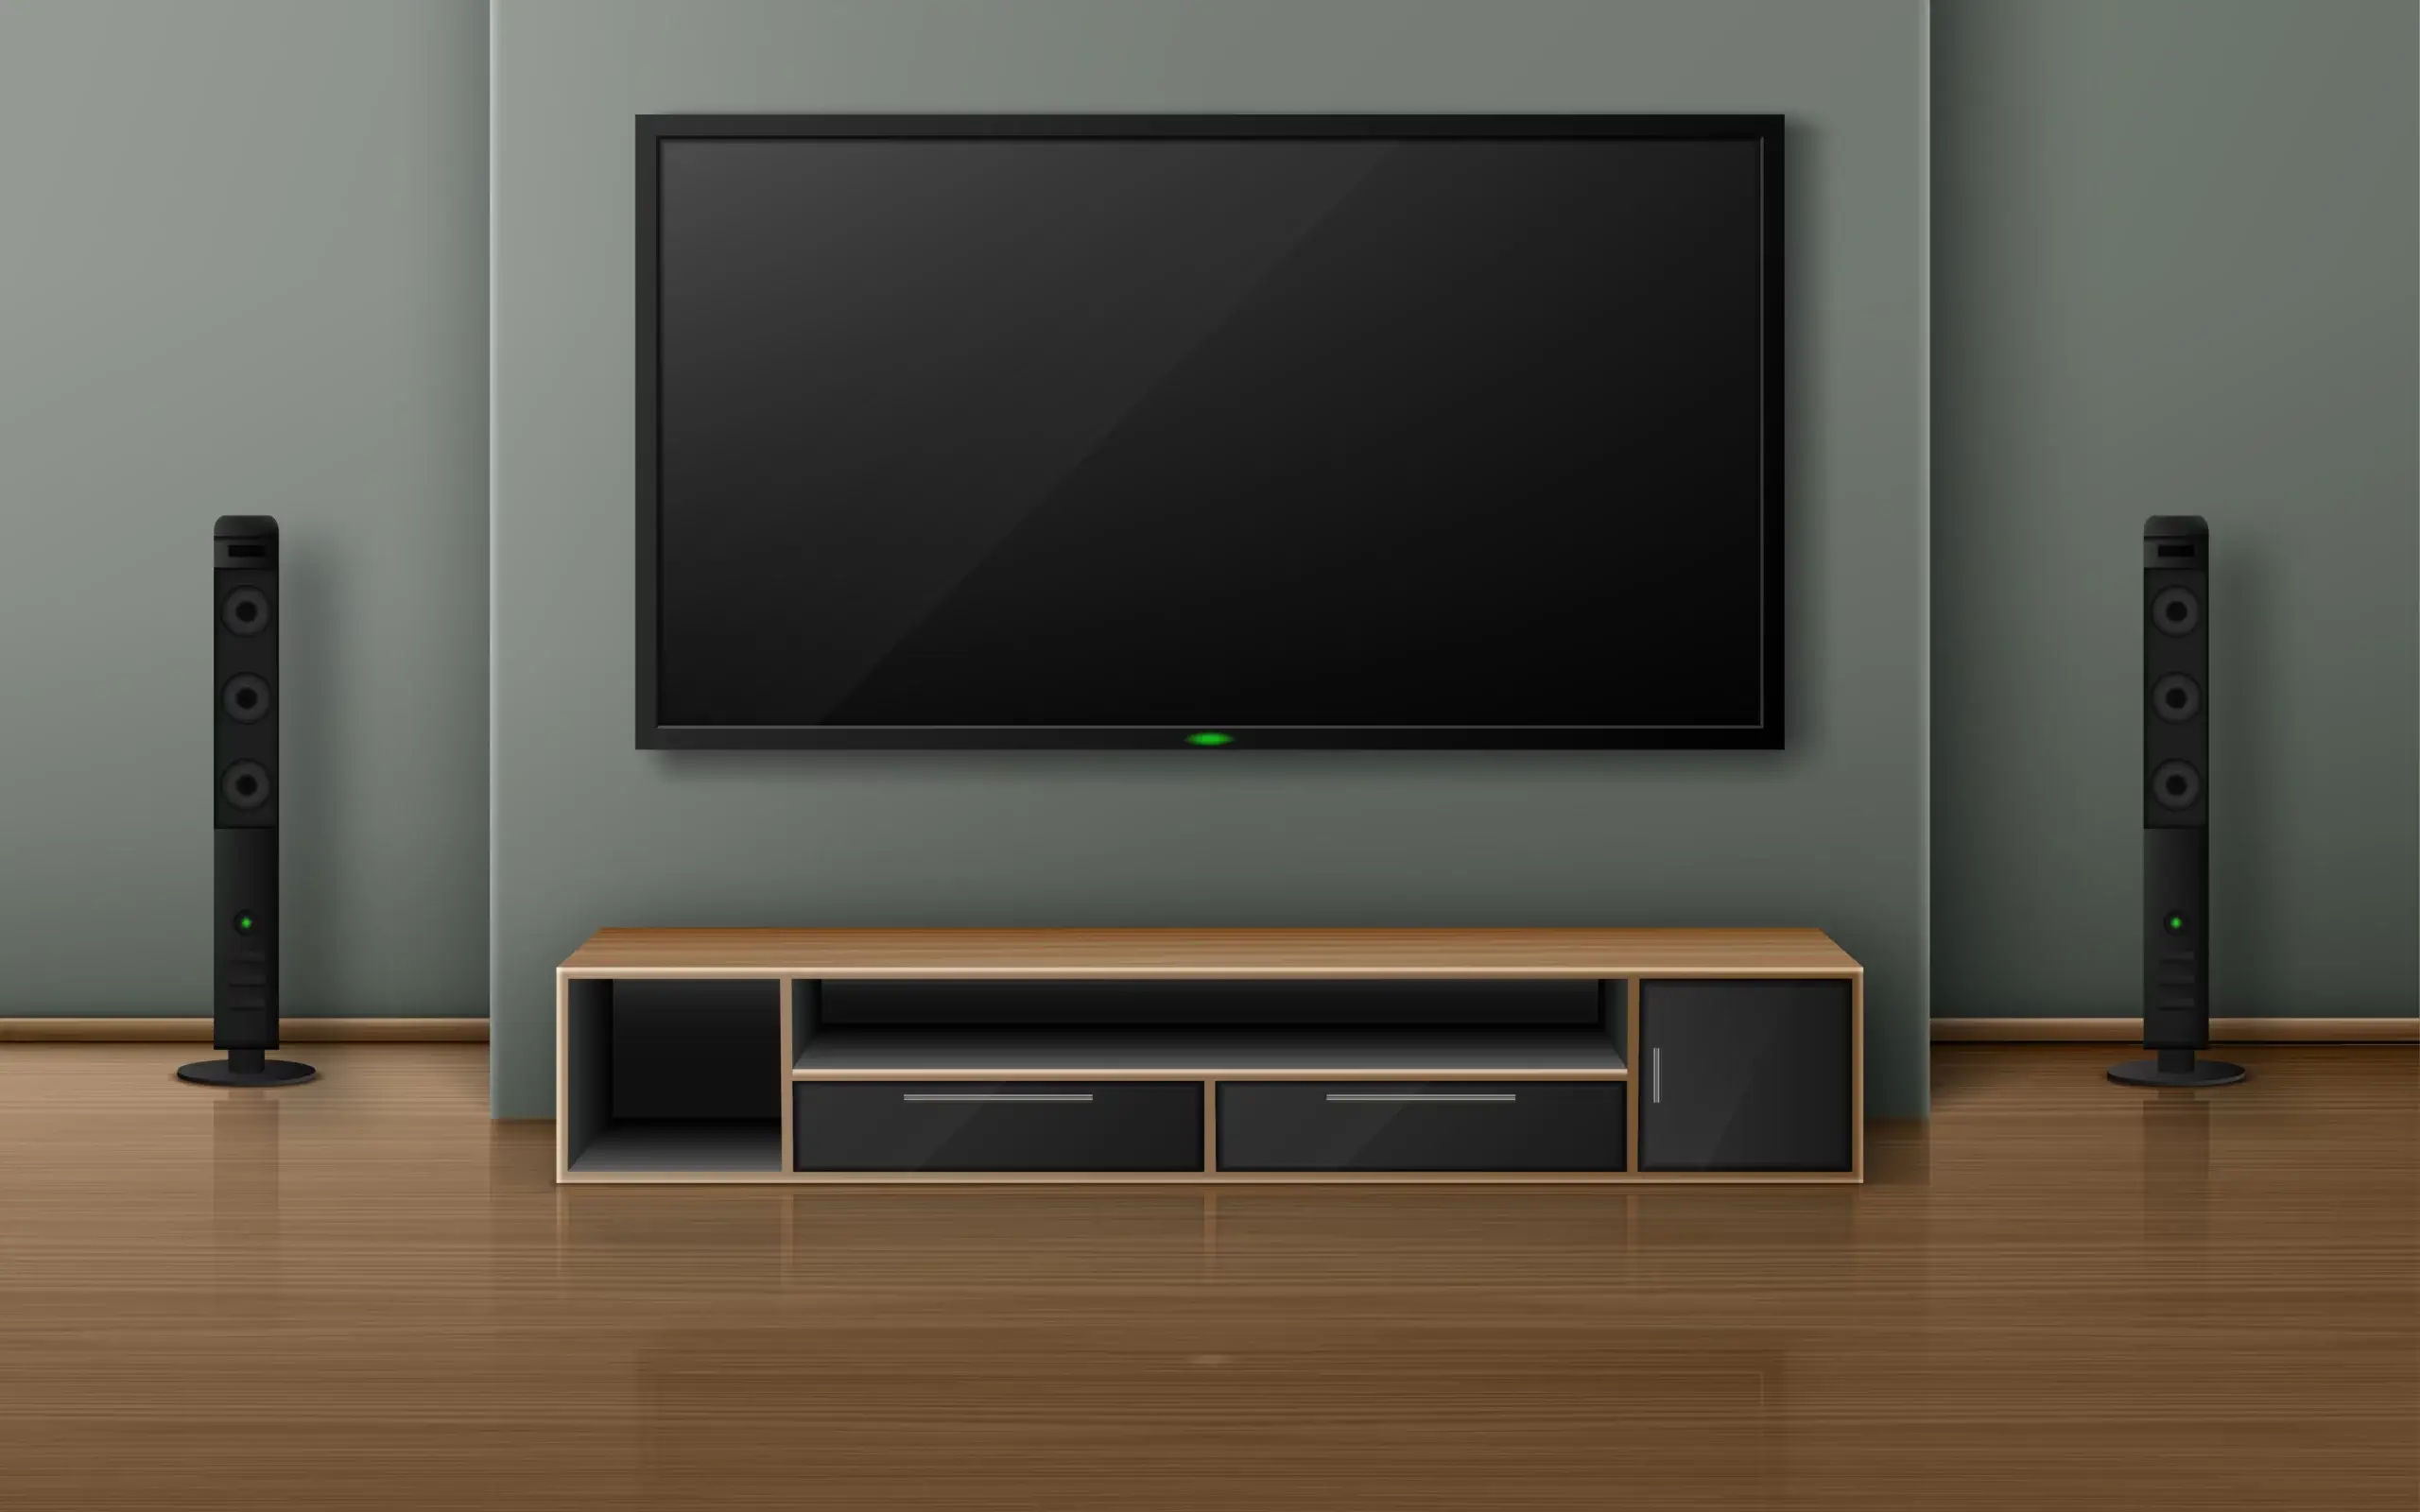 Is Your TV Consuming Power Even When It’s Turned Off? Find Out!